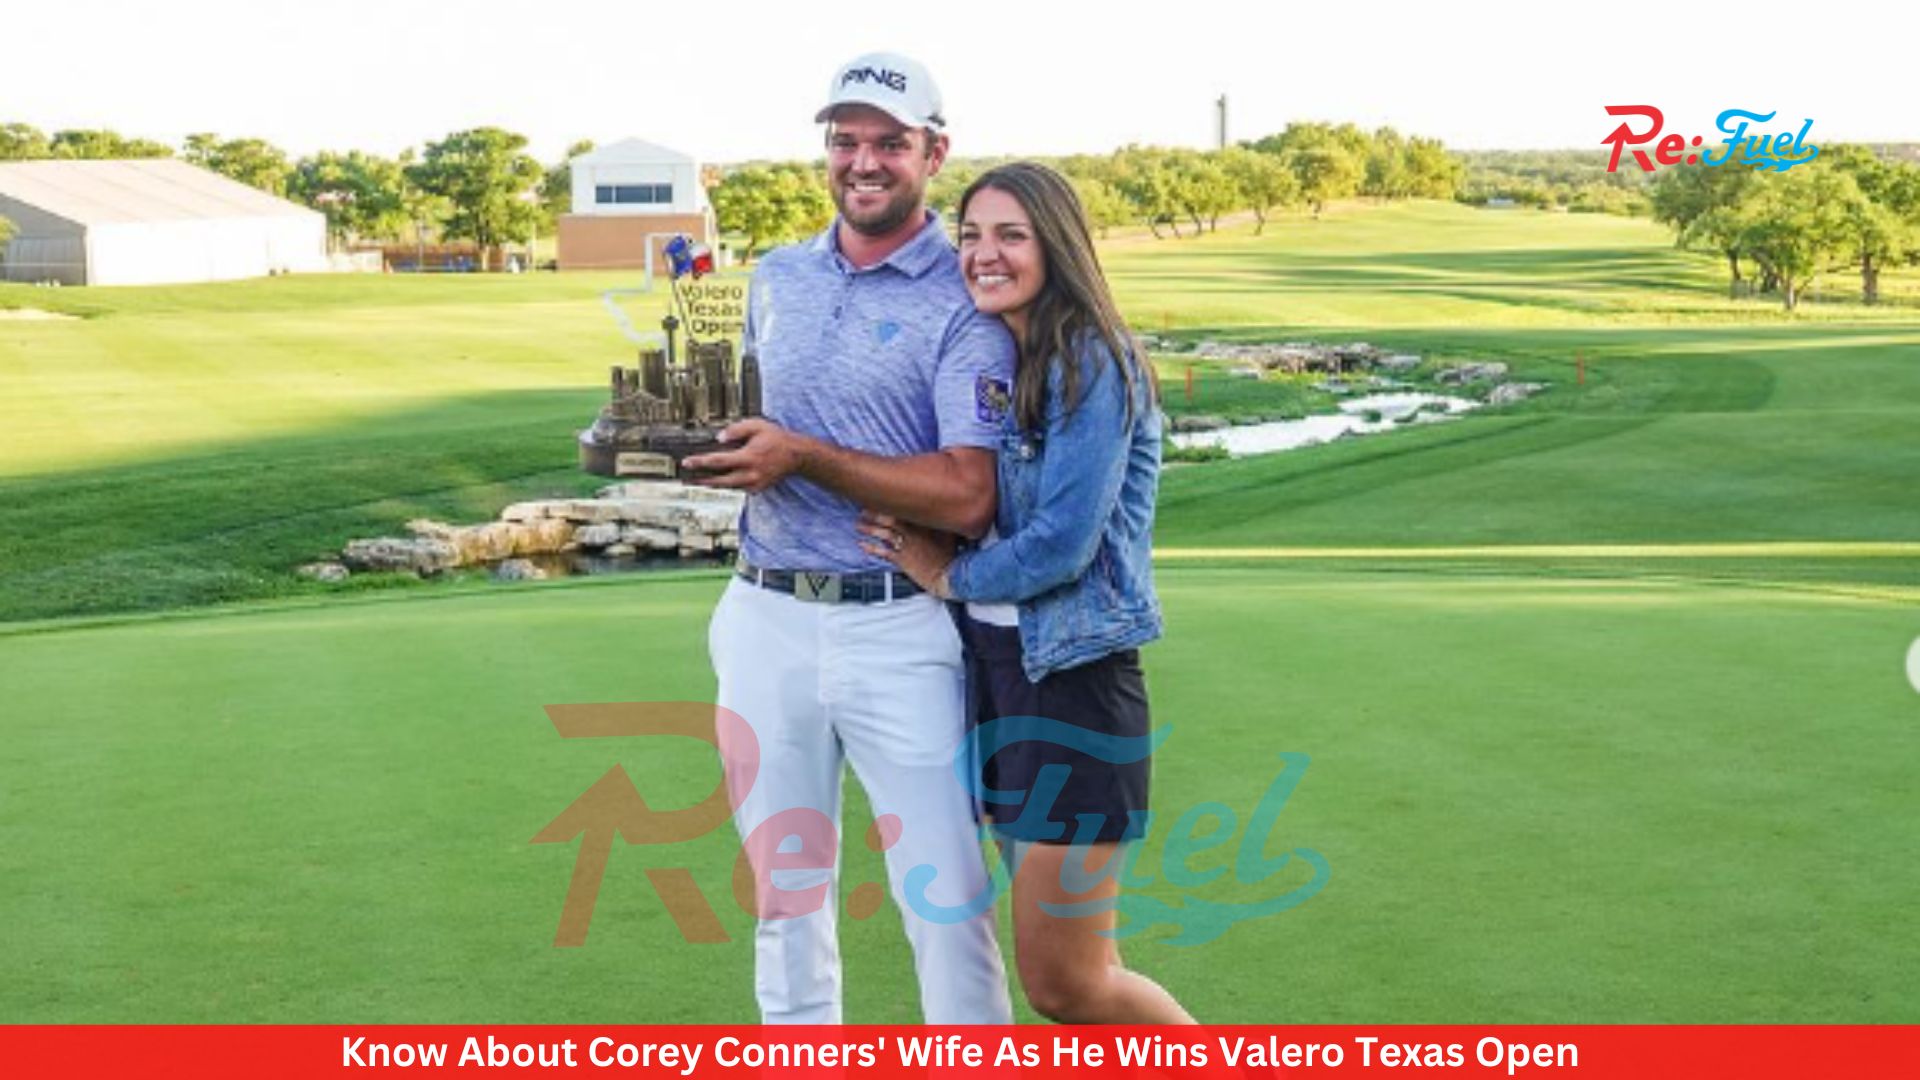 Know About Corey Conners' Wife As He Wins Valero Texas Open